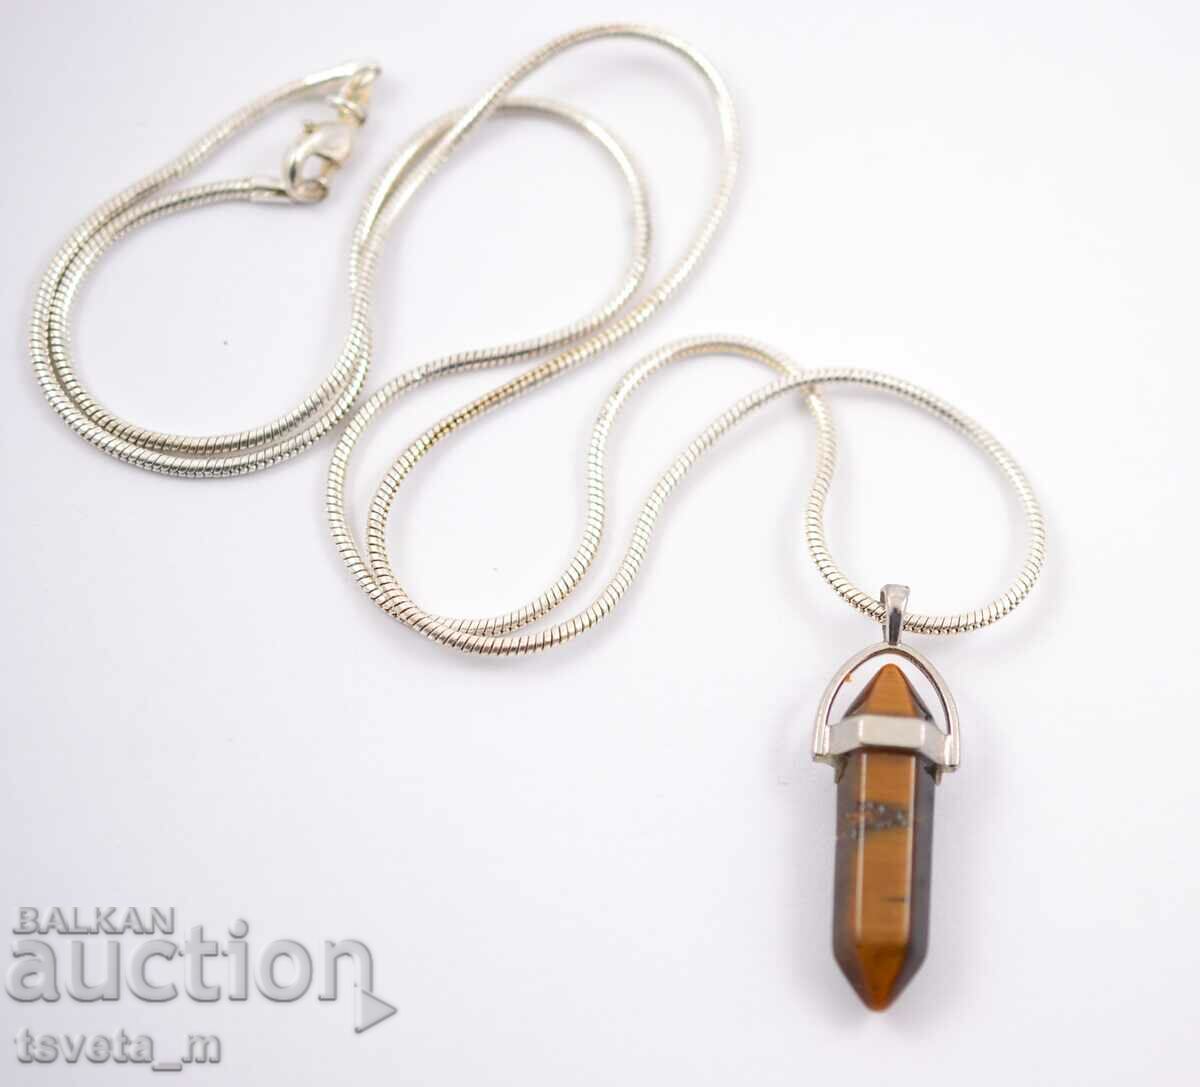 Necklace with hexagonal tiger eye stone